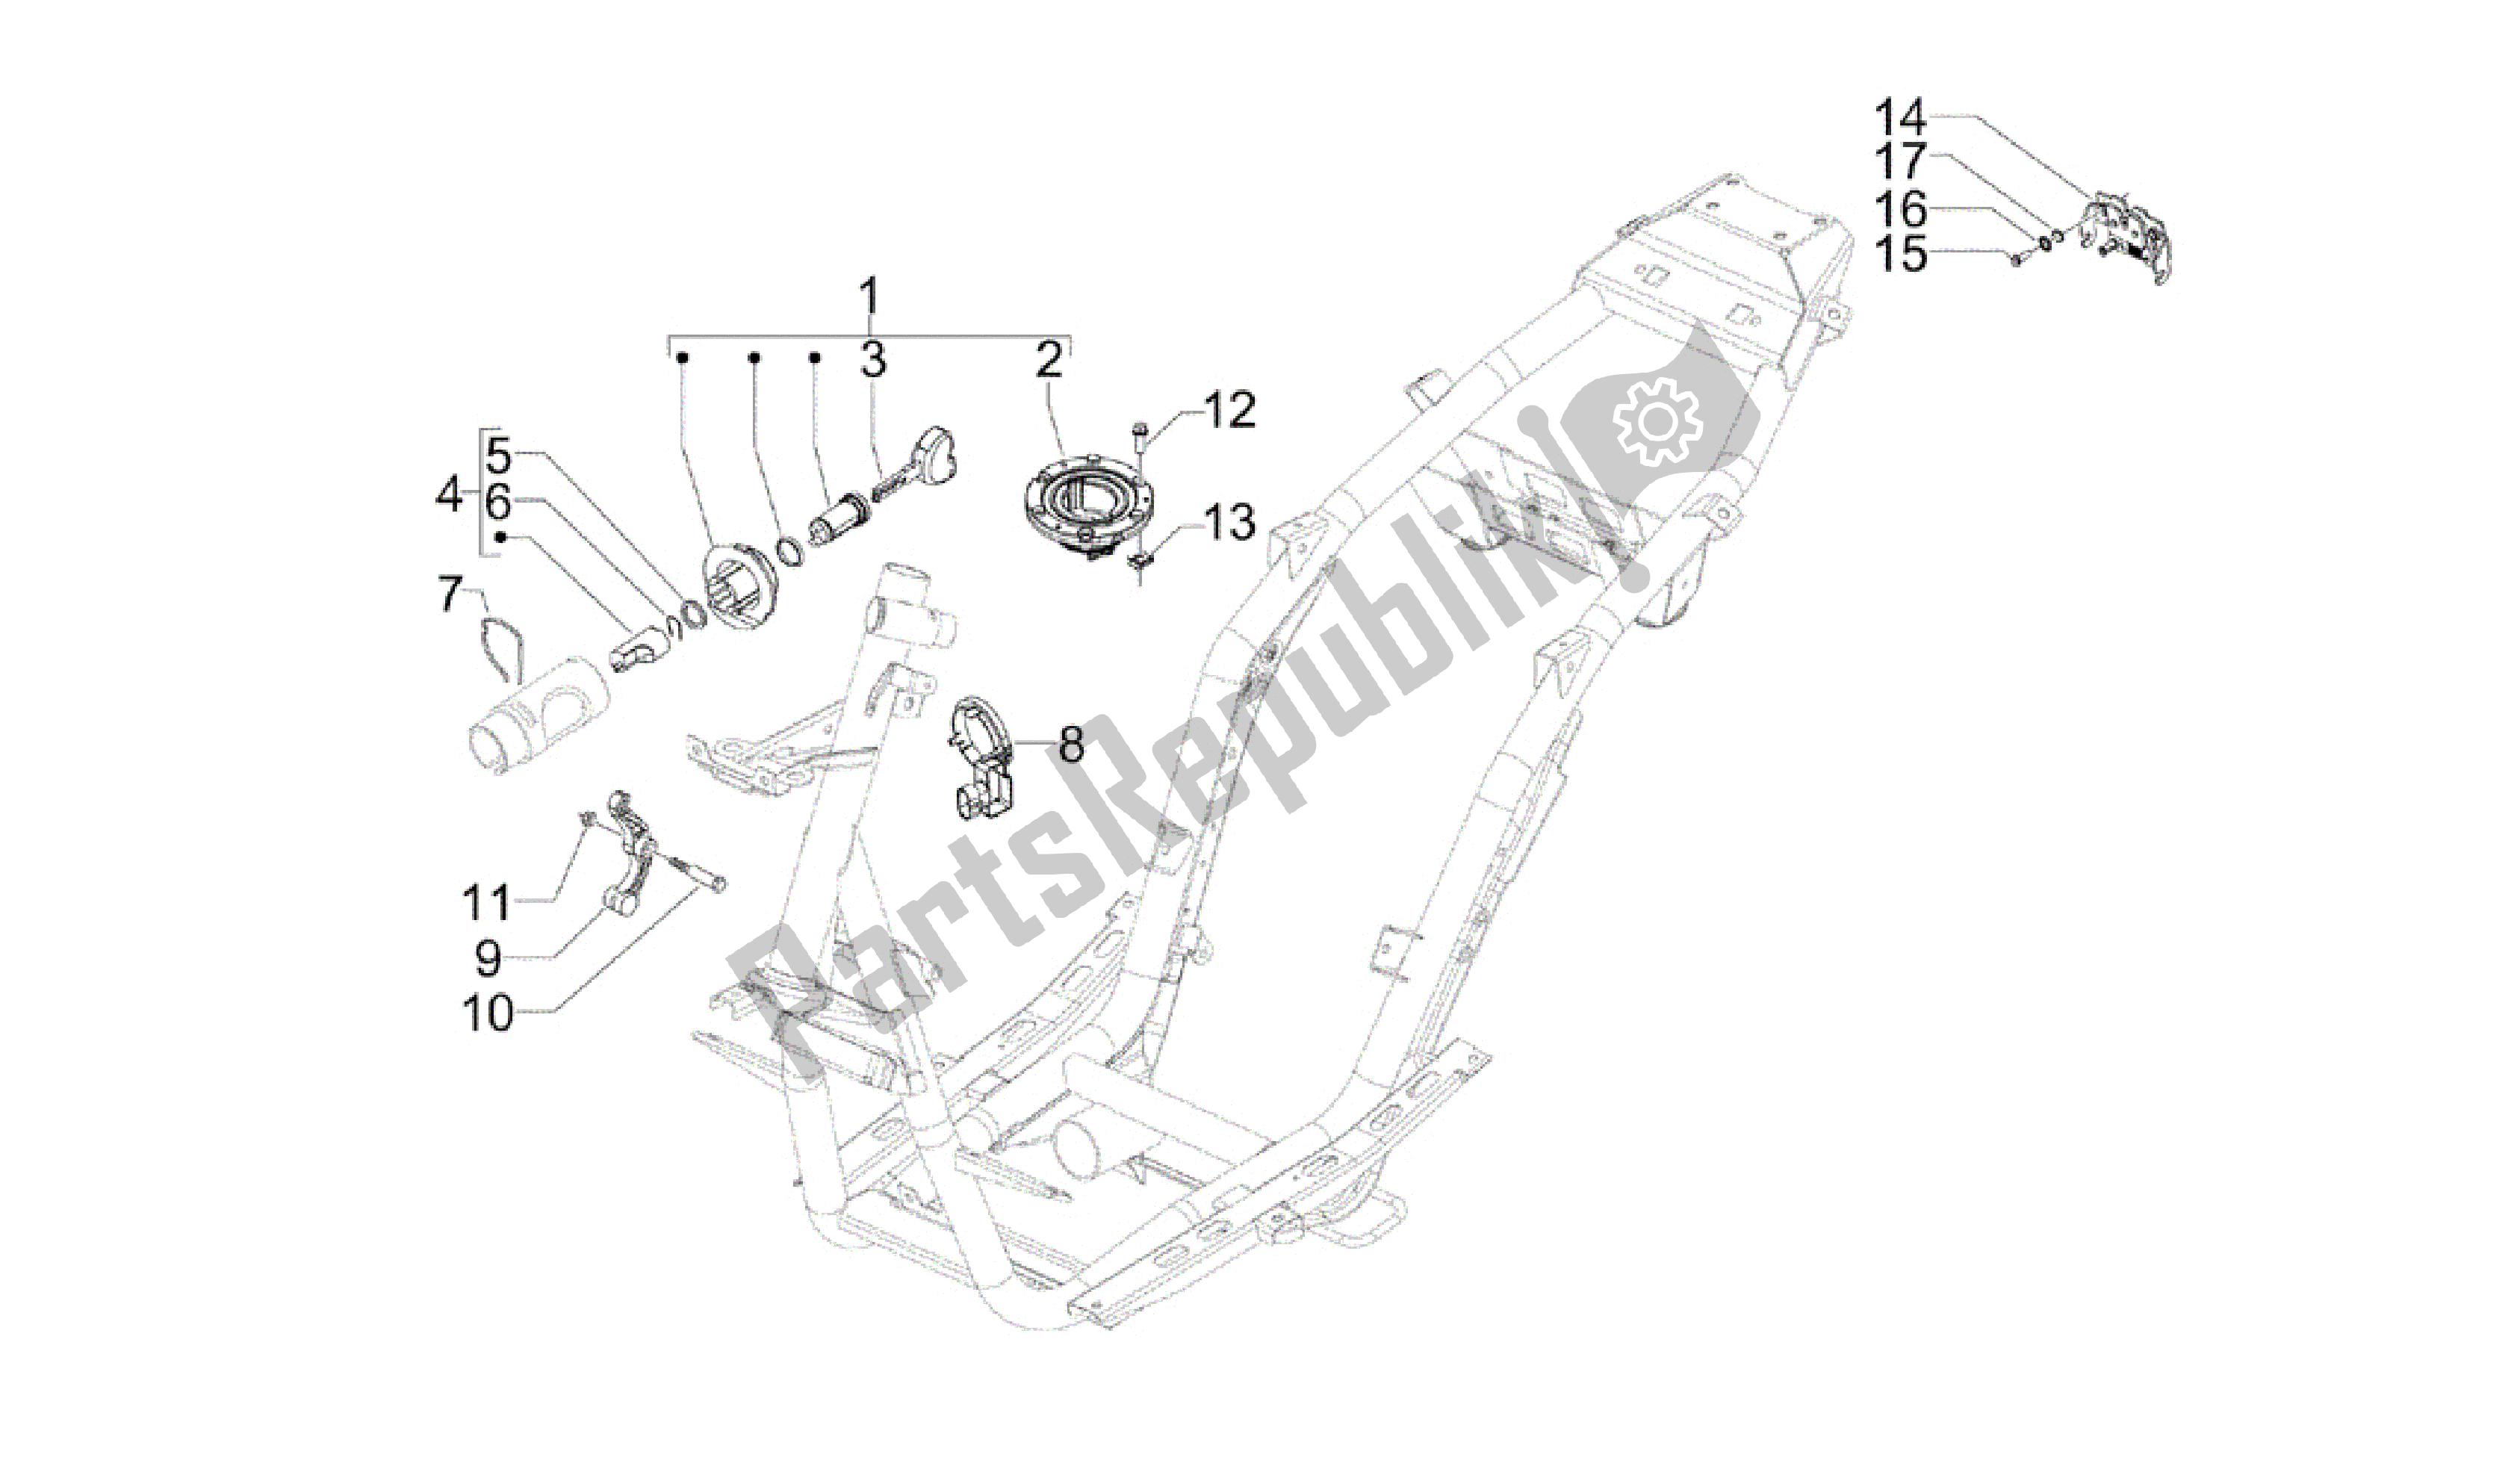 All parts for the Locks of the Gilera Runner 200 2005 - 2011